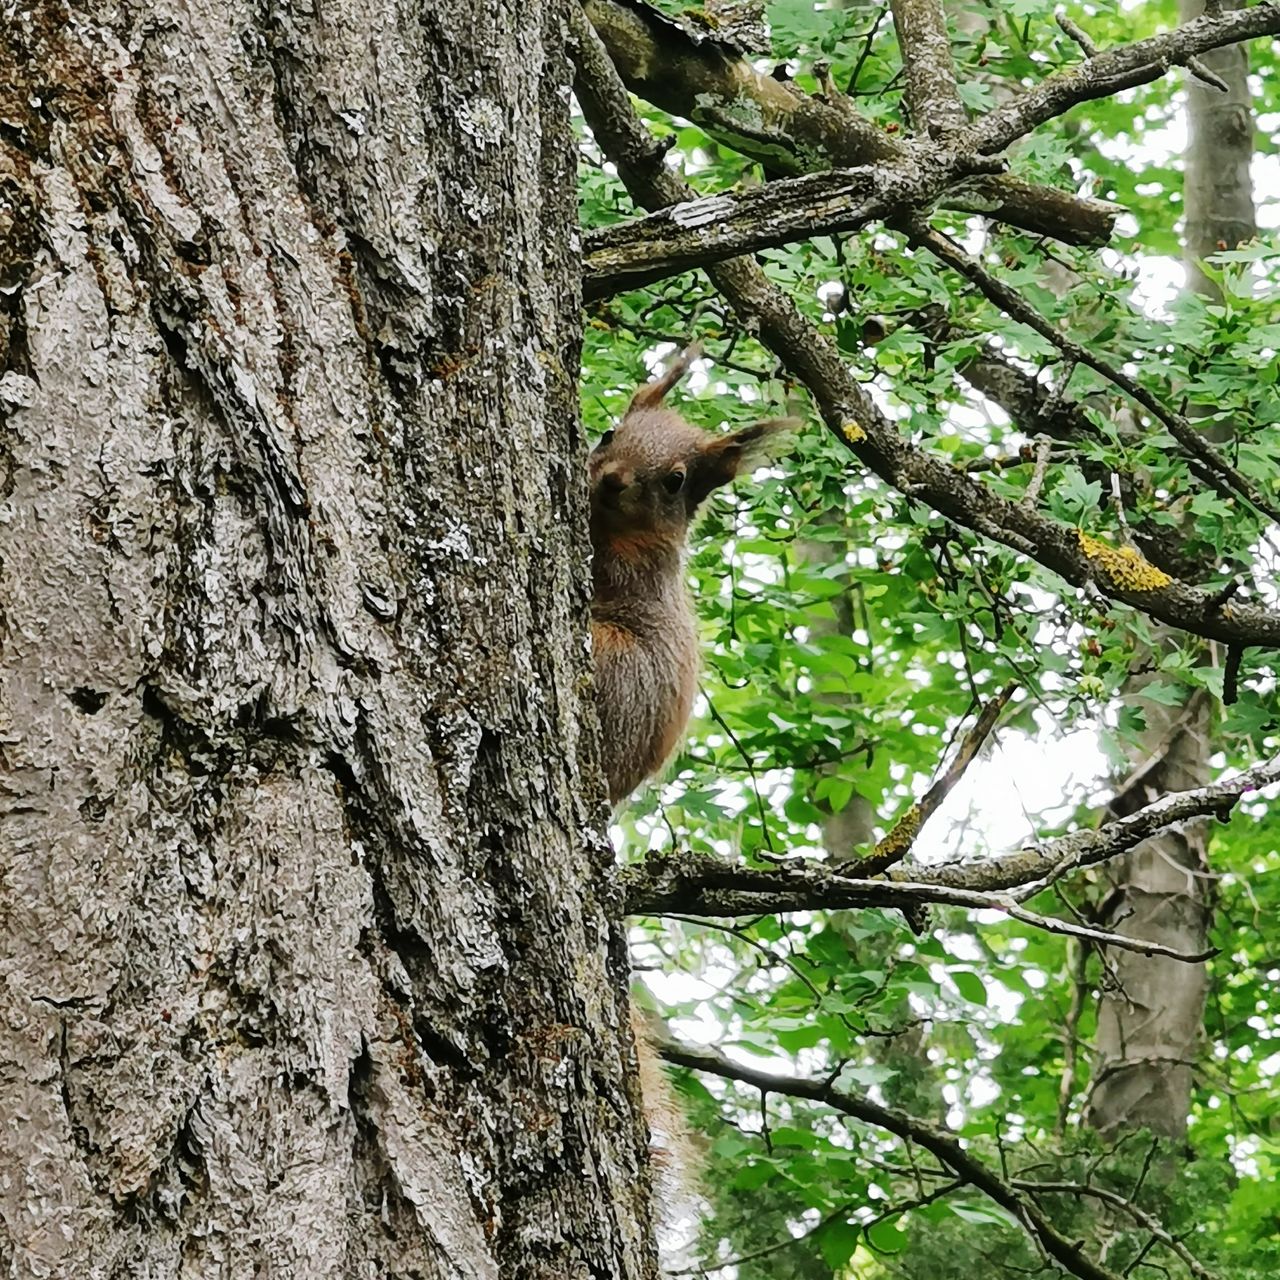 tree, plant, animal, animal themes, animal wildlife, wildlife, one animal, branch, tree trunk, trunk, nature, low angle view, mammal, no people, day, woodland, forest, outdoors, growth, land, climbing, squirrel